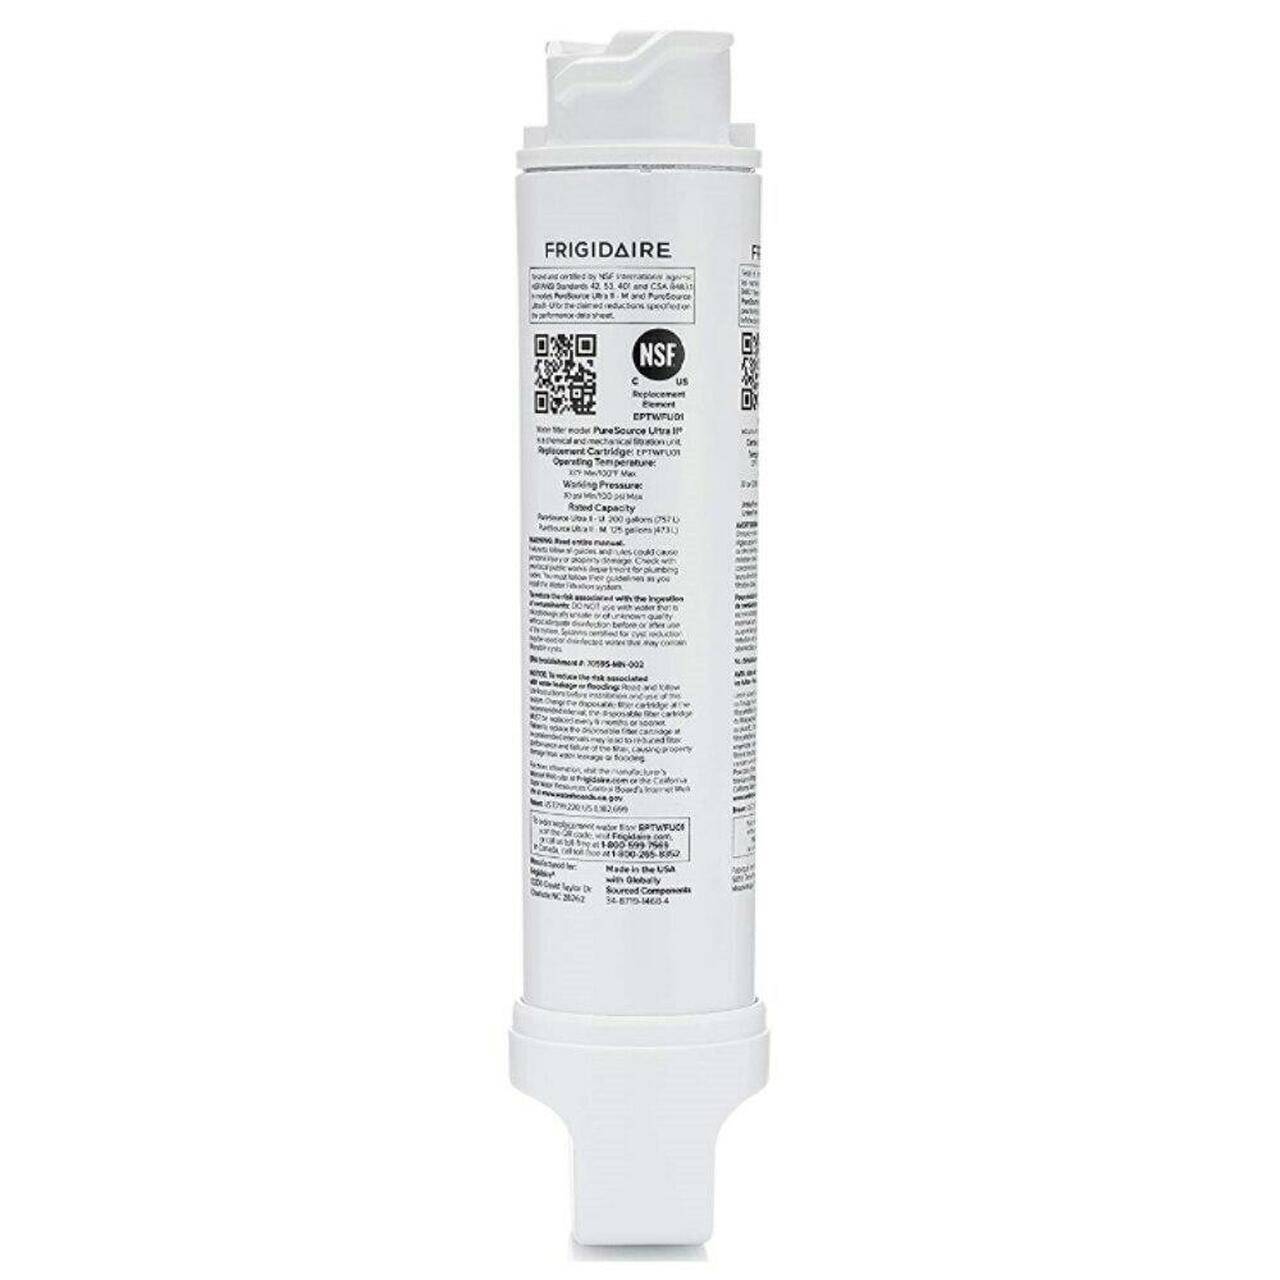 Frigidaire EPTWFU01 Replacement for ClearChoice CLCH128-L, CLCH128-D